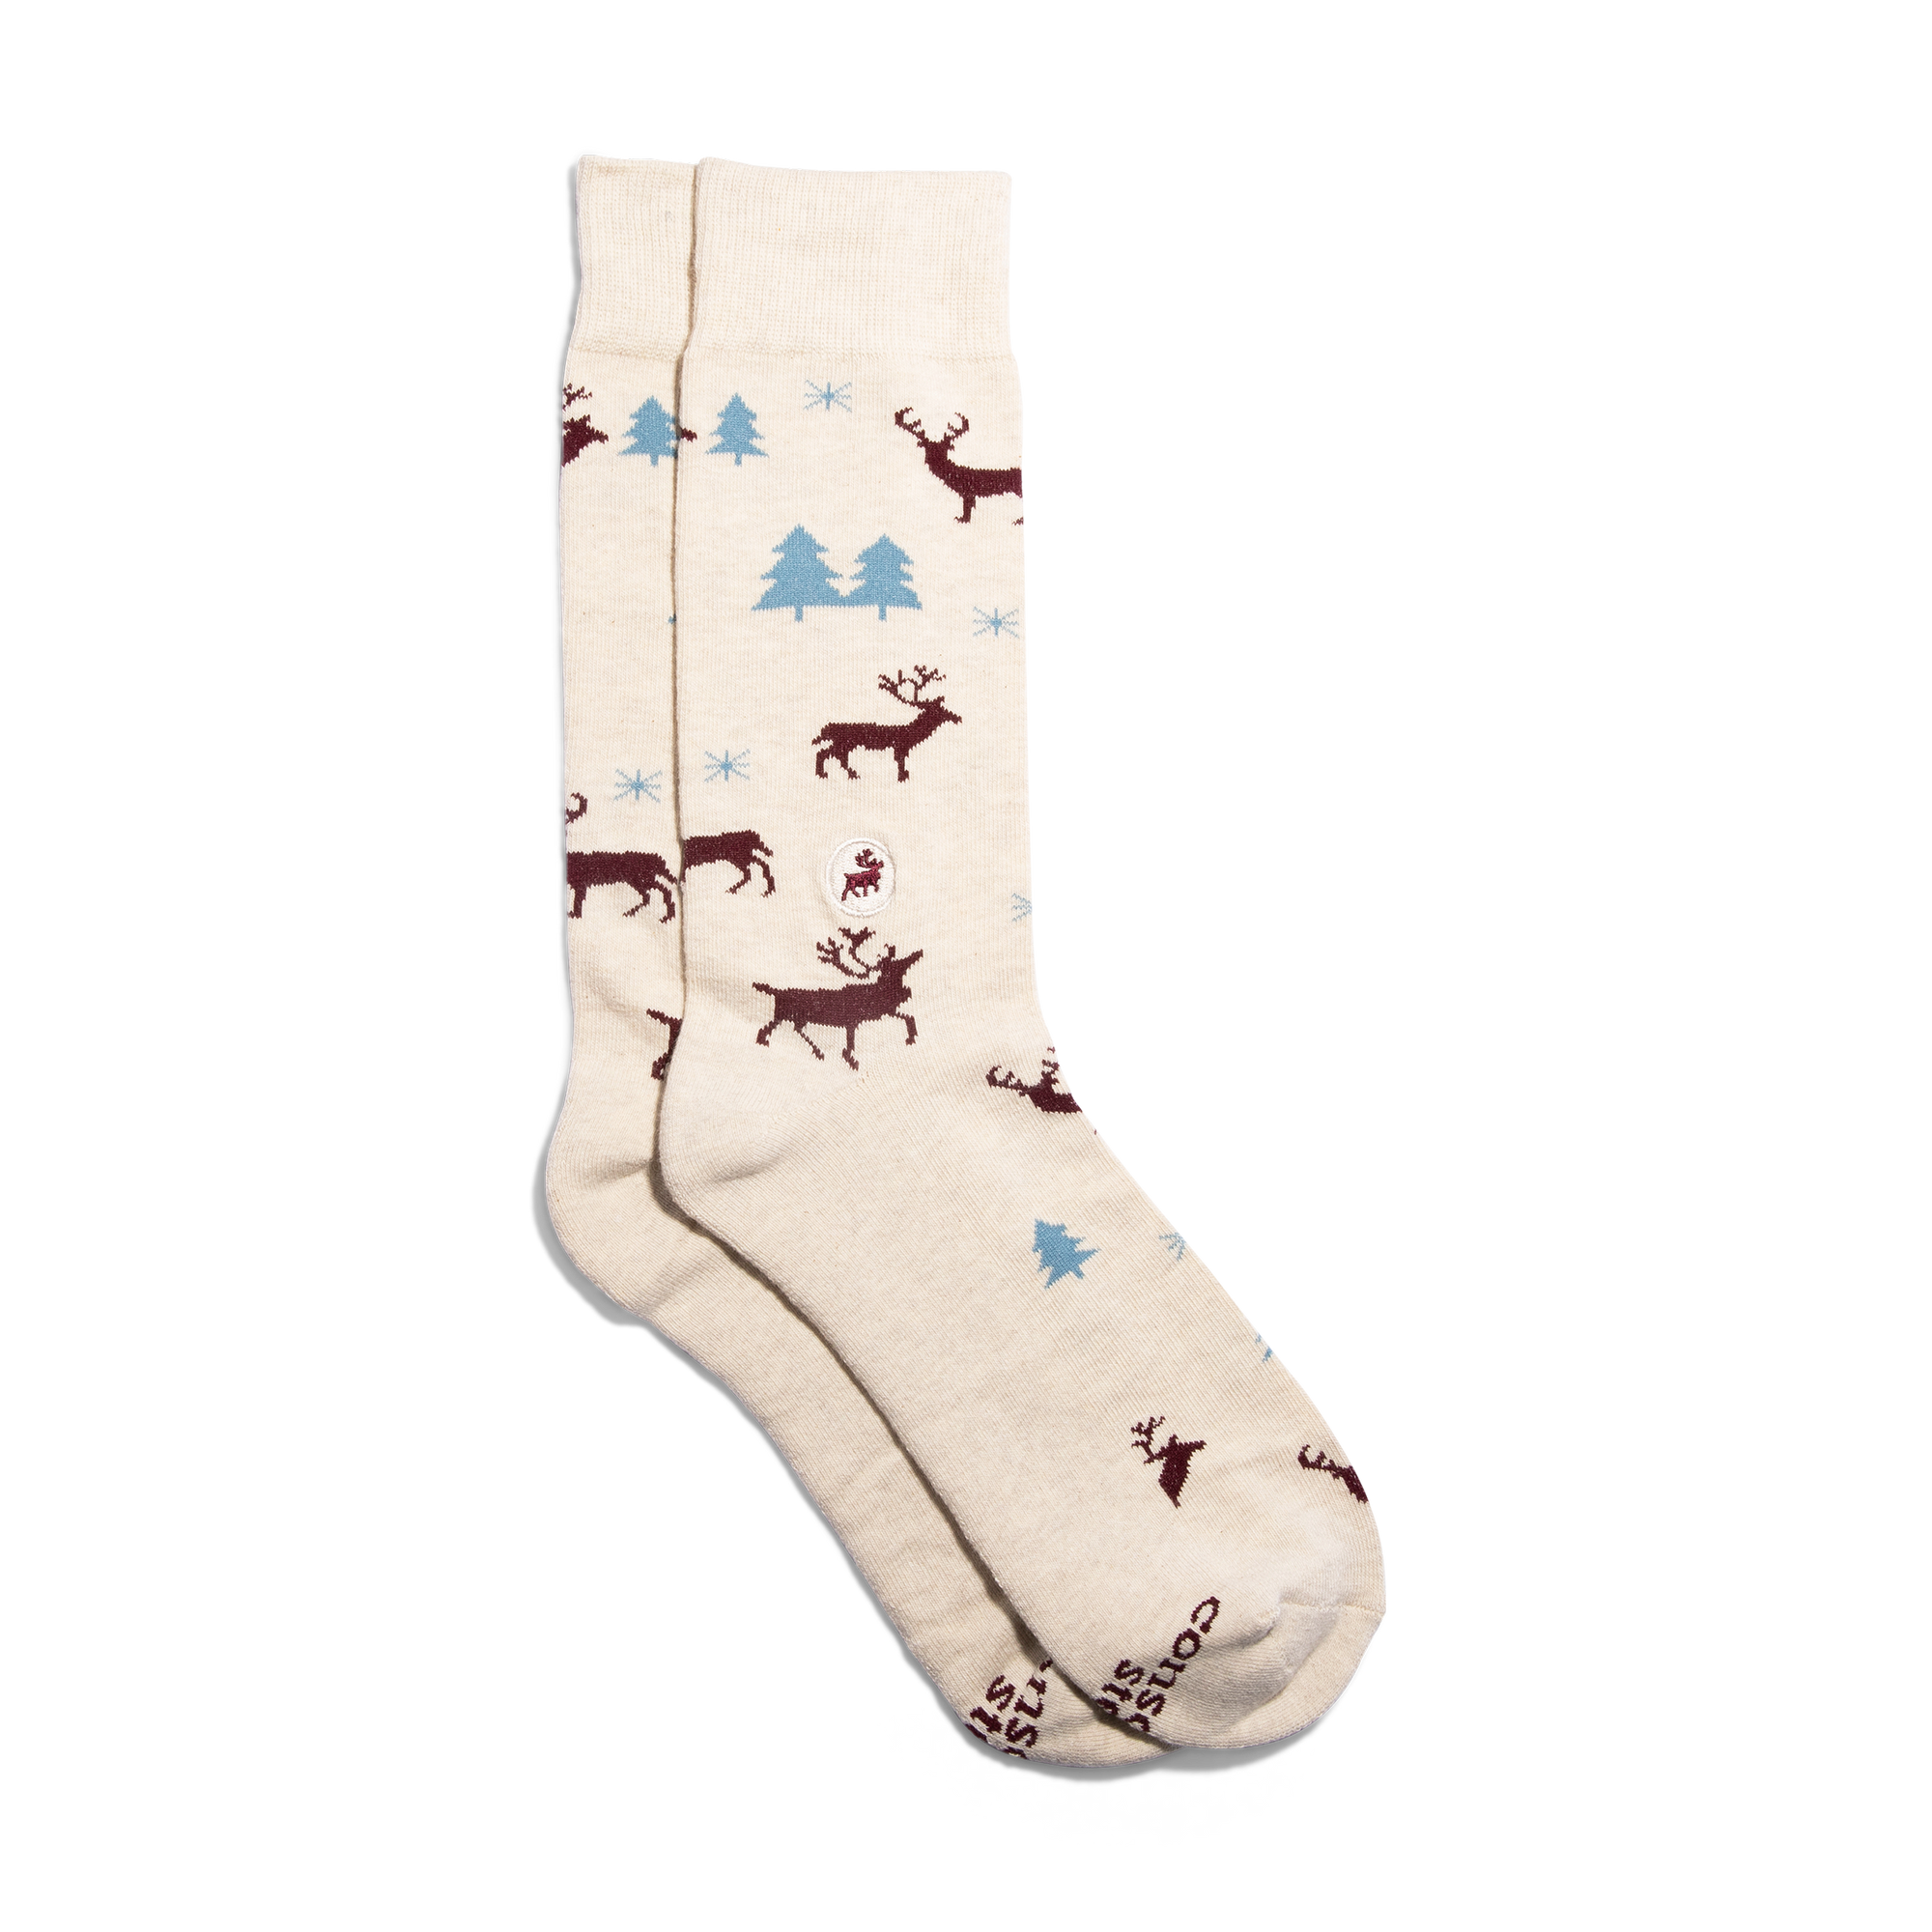 Socks that Protect the Arctic (reindeer) (IS)